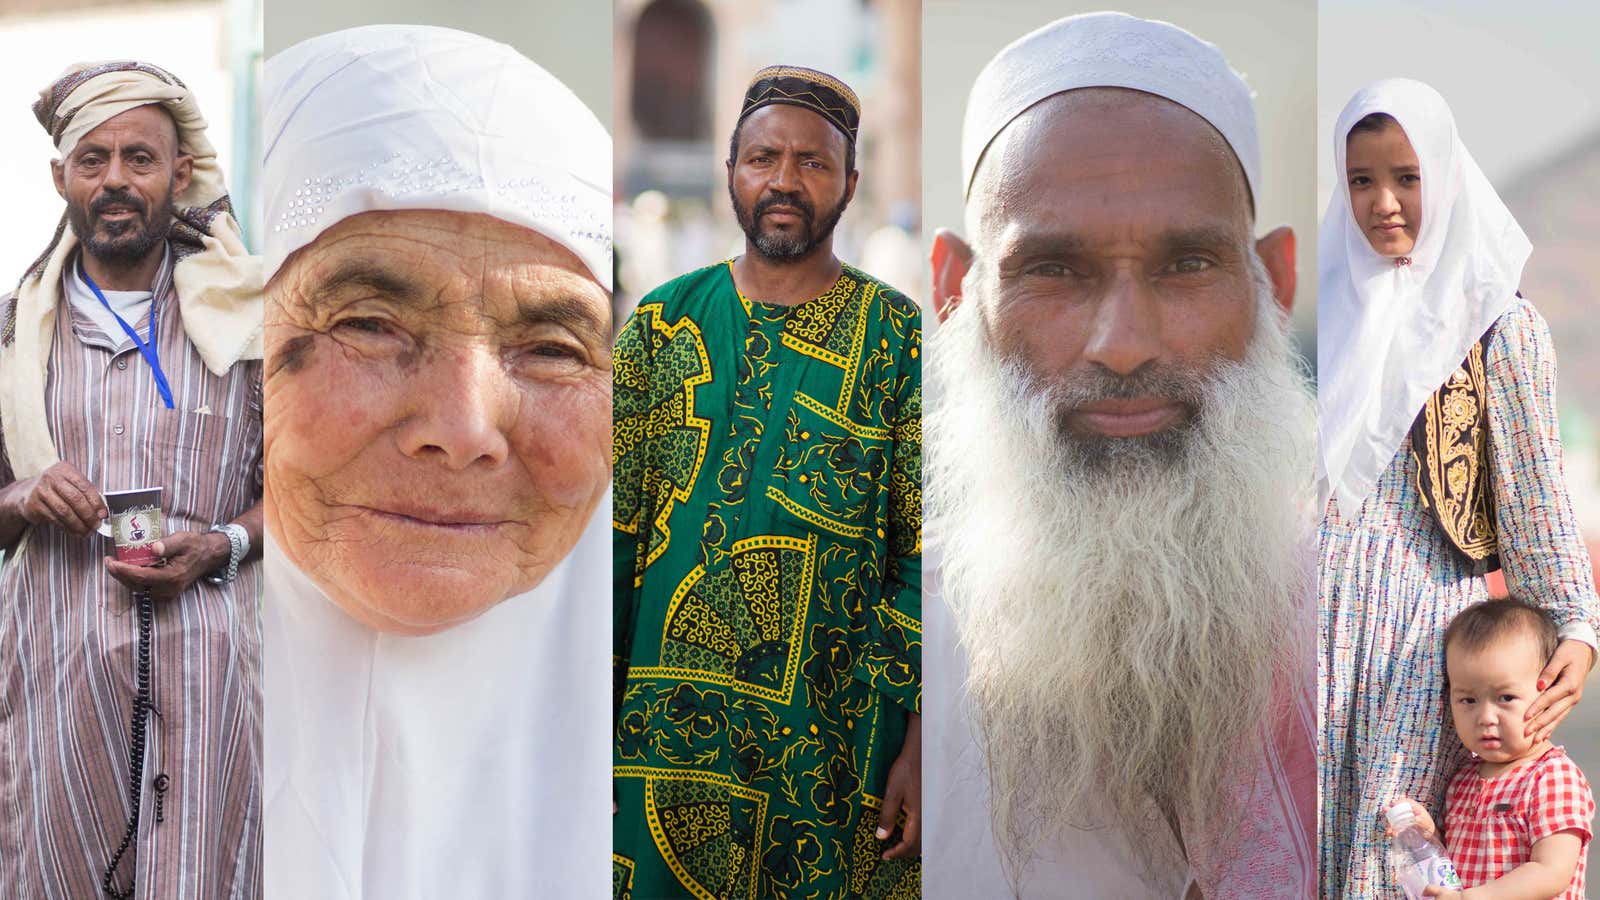 Photos: Faces of Muslim pilgrims from around the world at this year’s Hajj